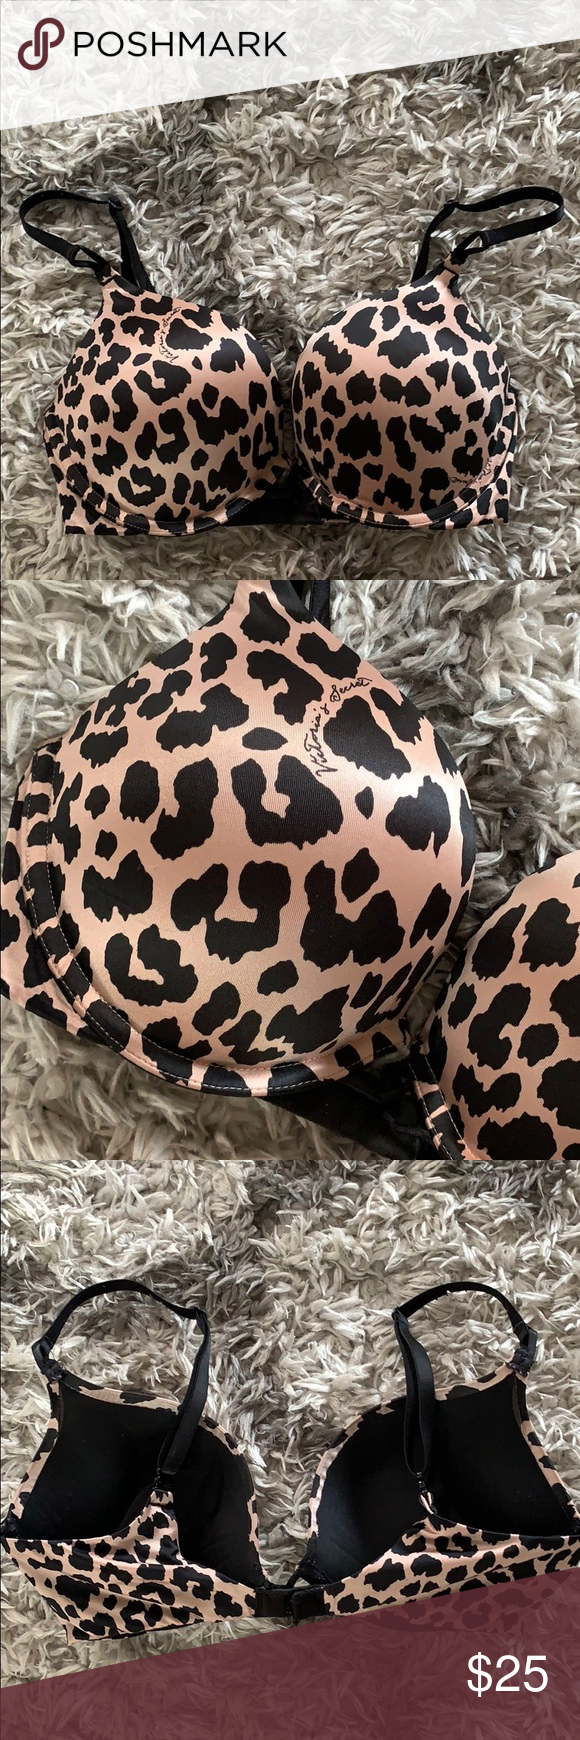 ✨VS Cheetah Print Bombshell Bra Size 32D✨ Used but in good condition Victori…